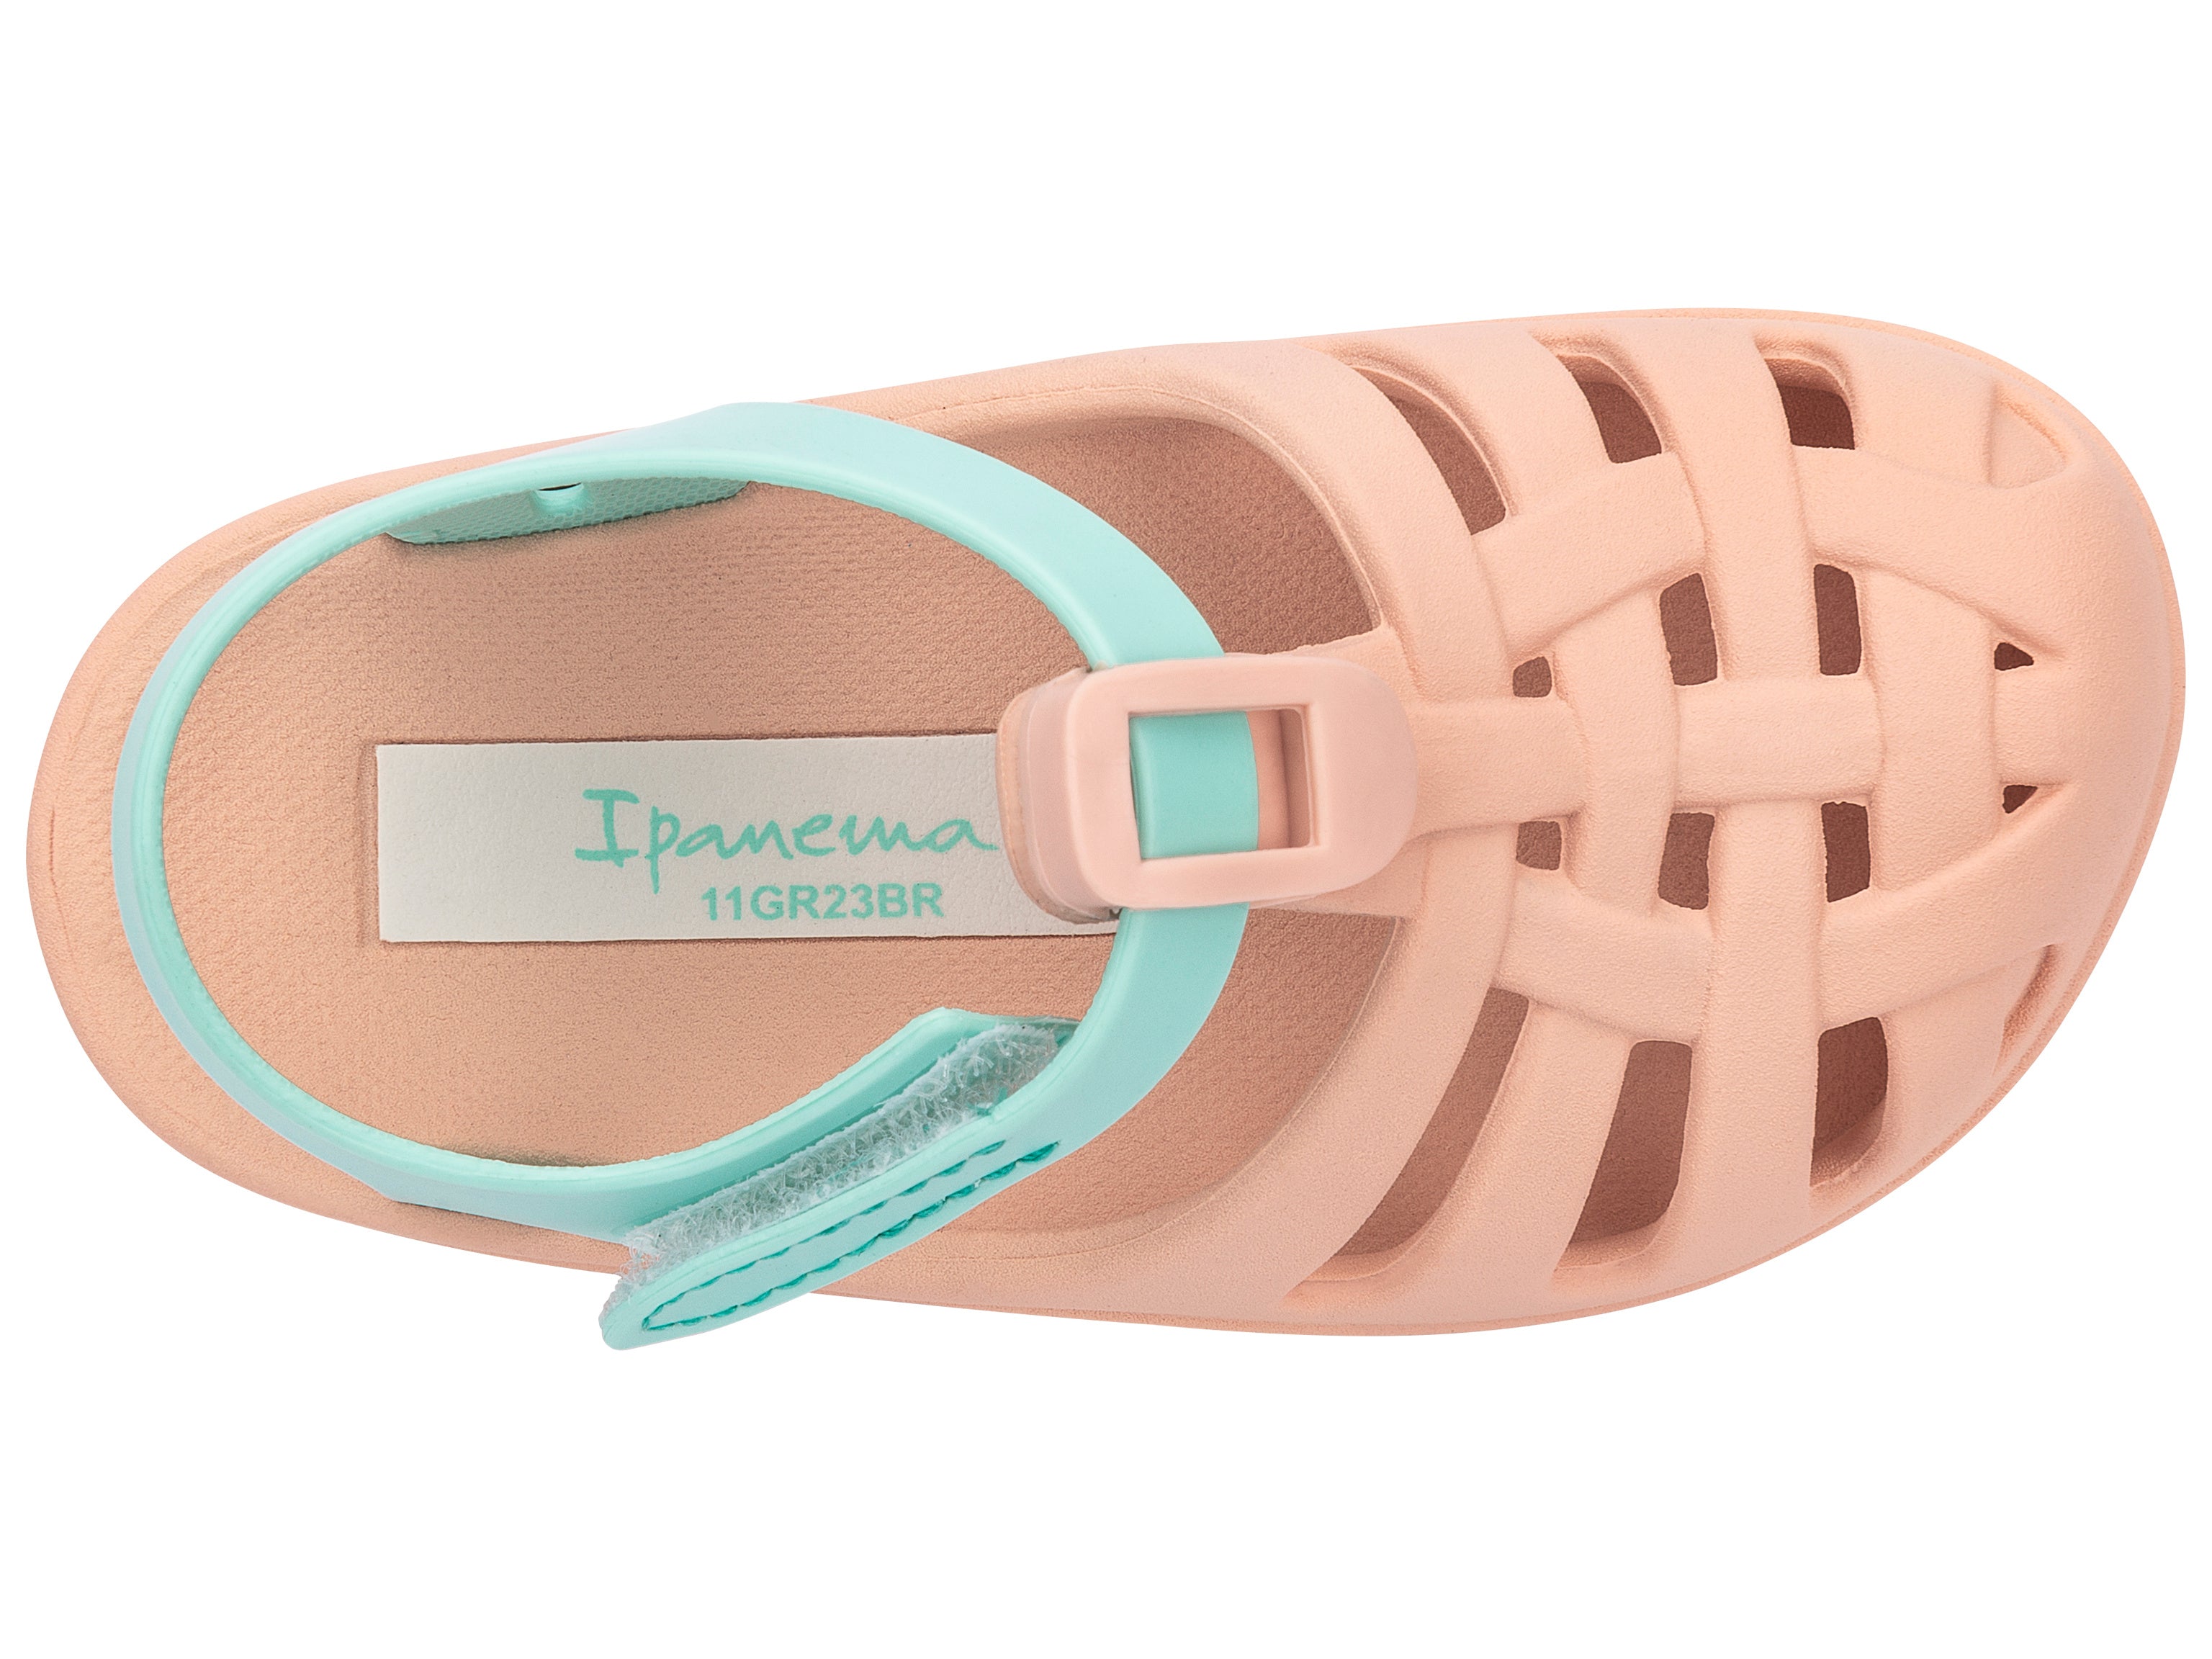 Top view of a beige Ipanema Summer Basic baby sandal with green strap.